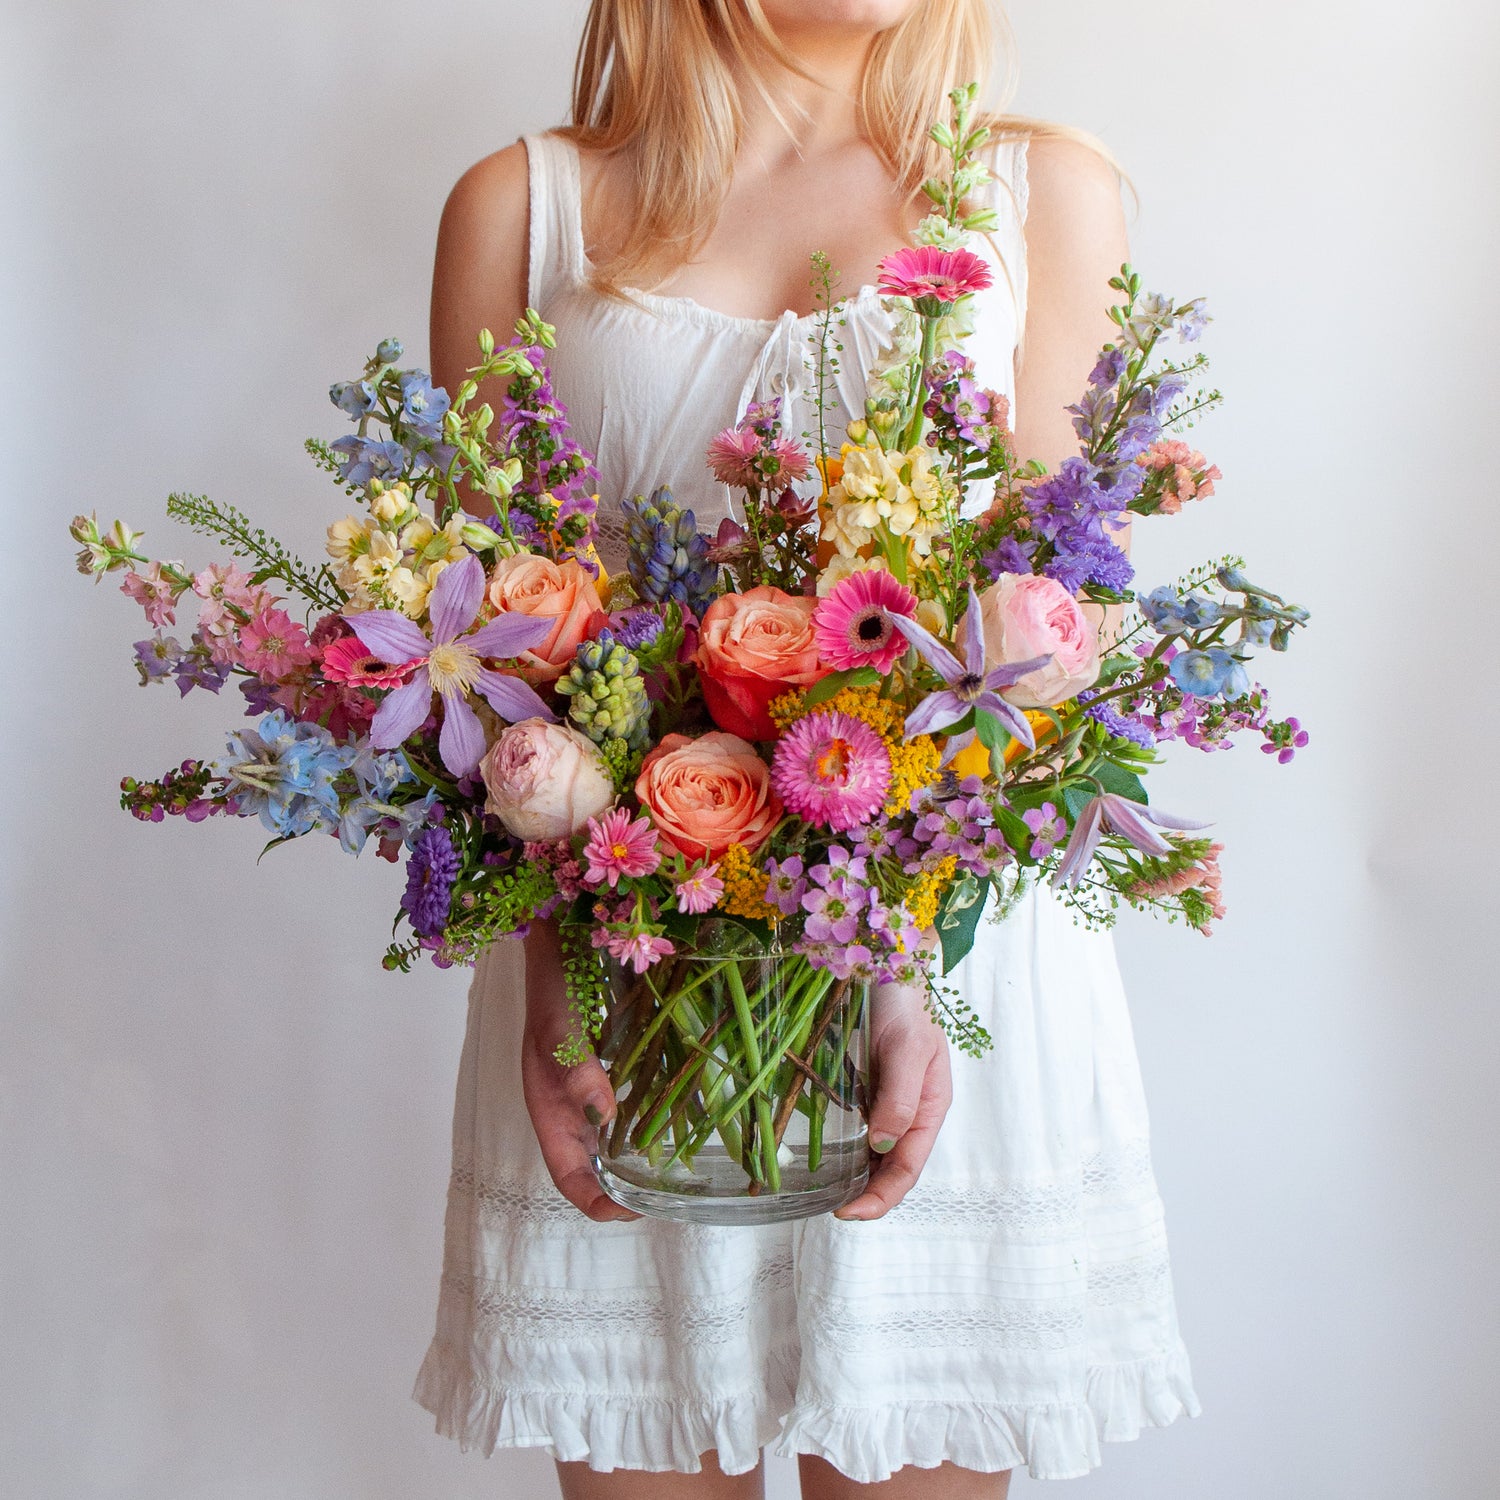 a woman in a white dress holds a glass vase with a medium flower arrangement in it. The flowers are many colors and include roses, tulips, daisies, snapdragon, clematis, stock, straw flower, and delphinium.